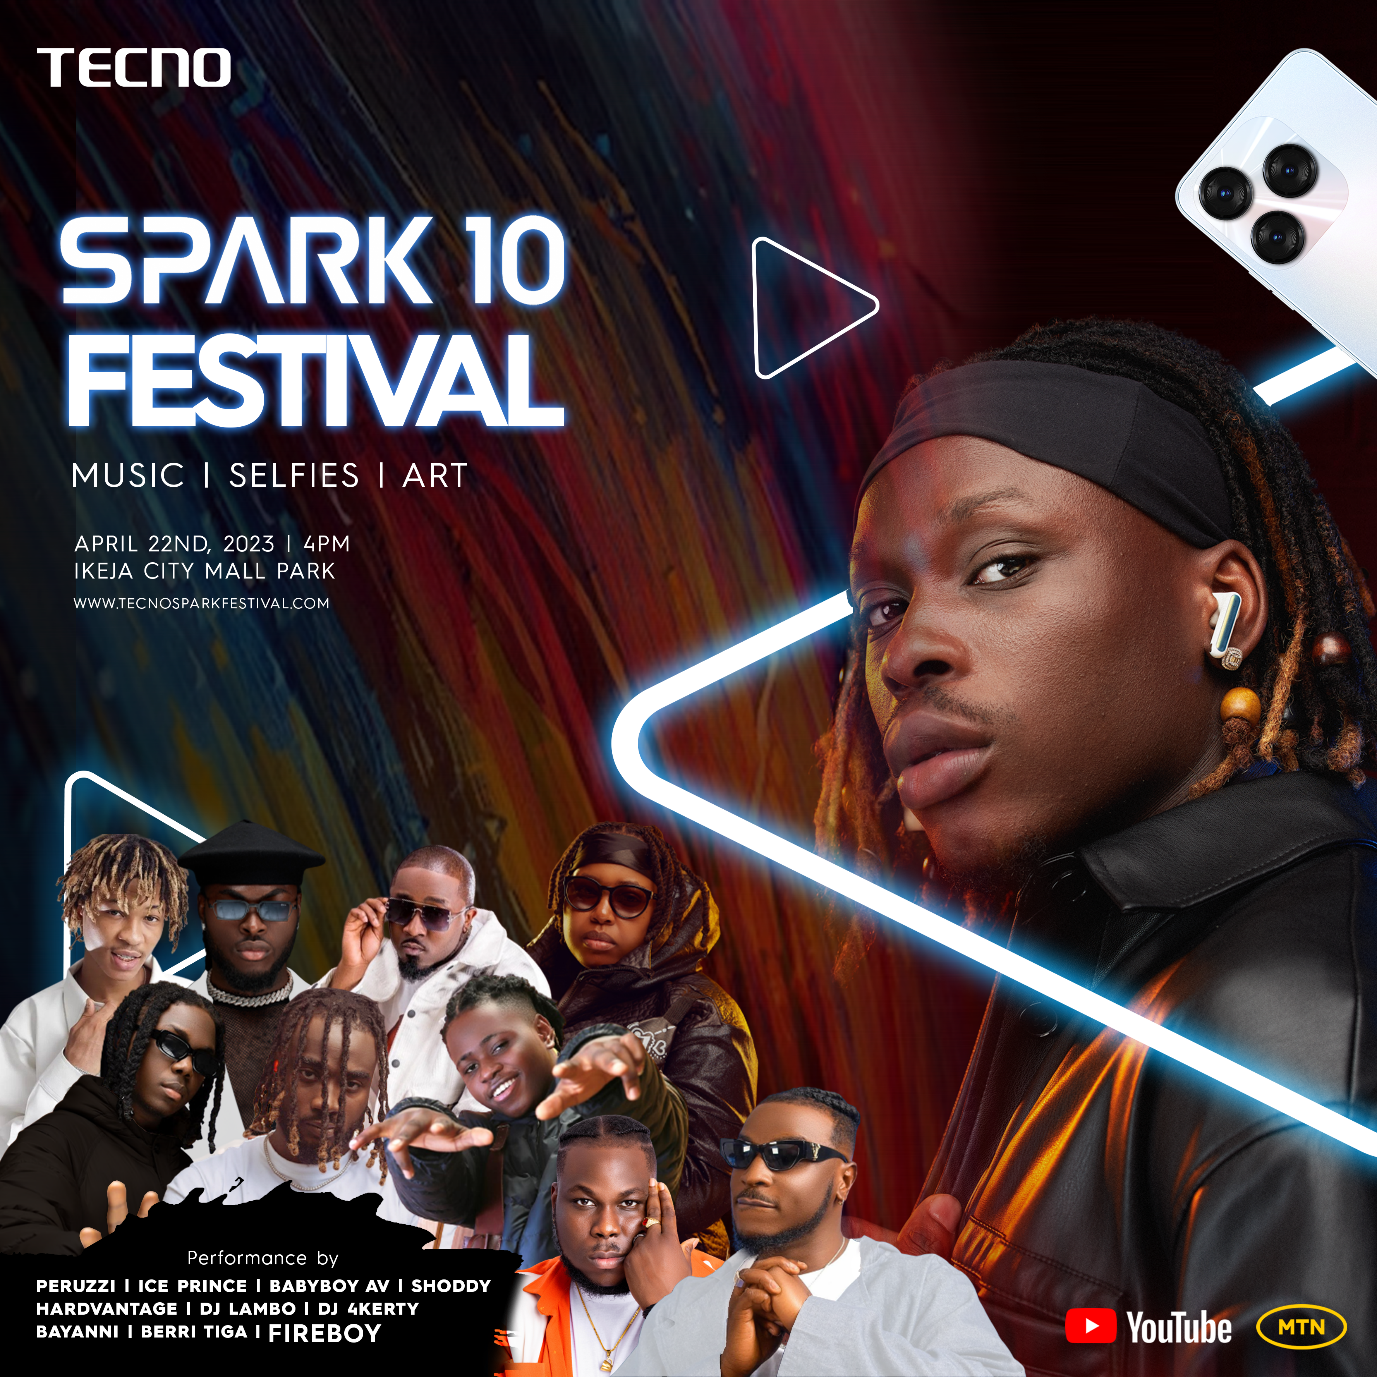 Fireboy, Iceprince, Peruzzi, amongst others, are to perform at the Tecno Spark 10 Fest this Saturday!